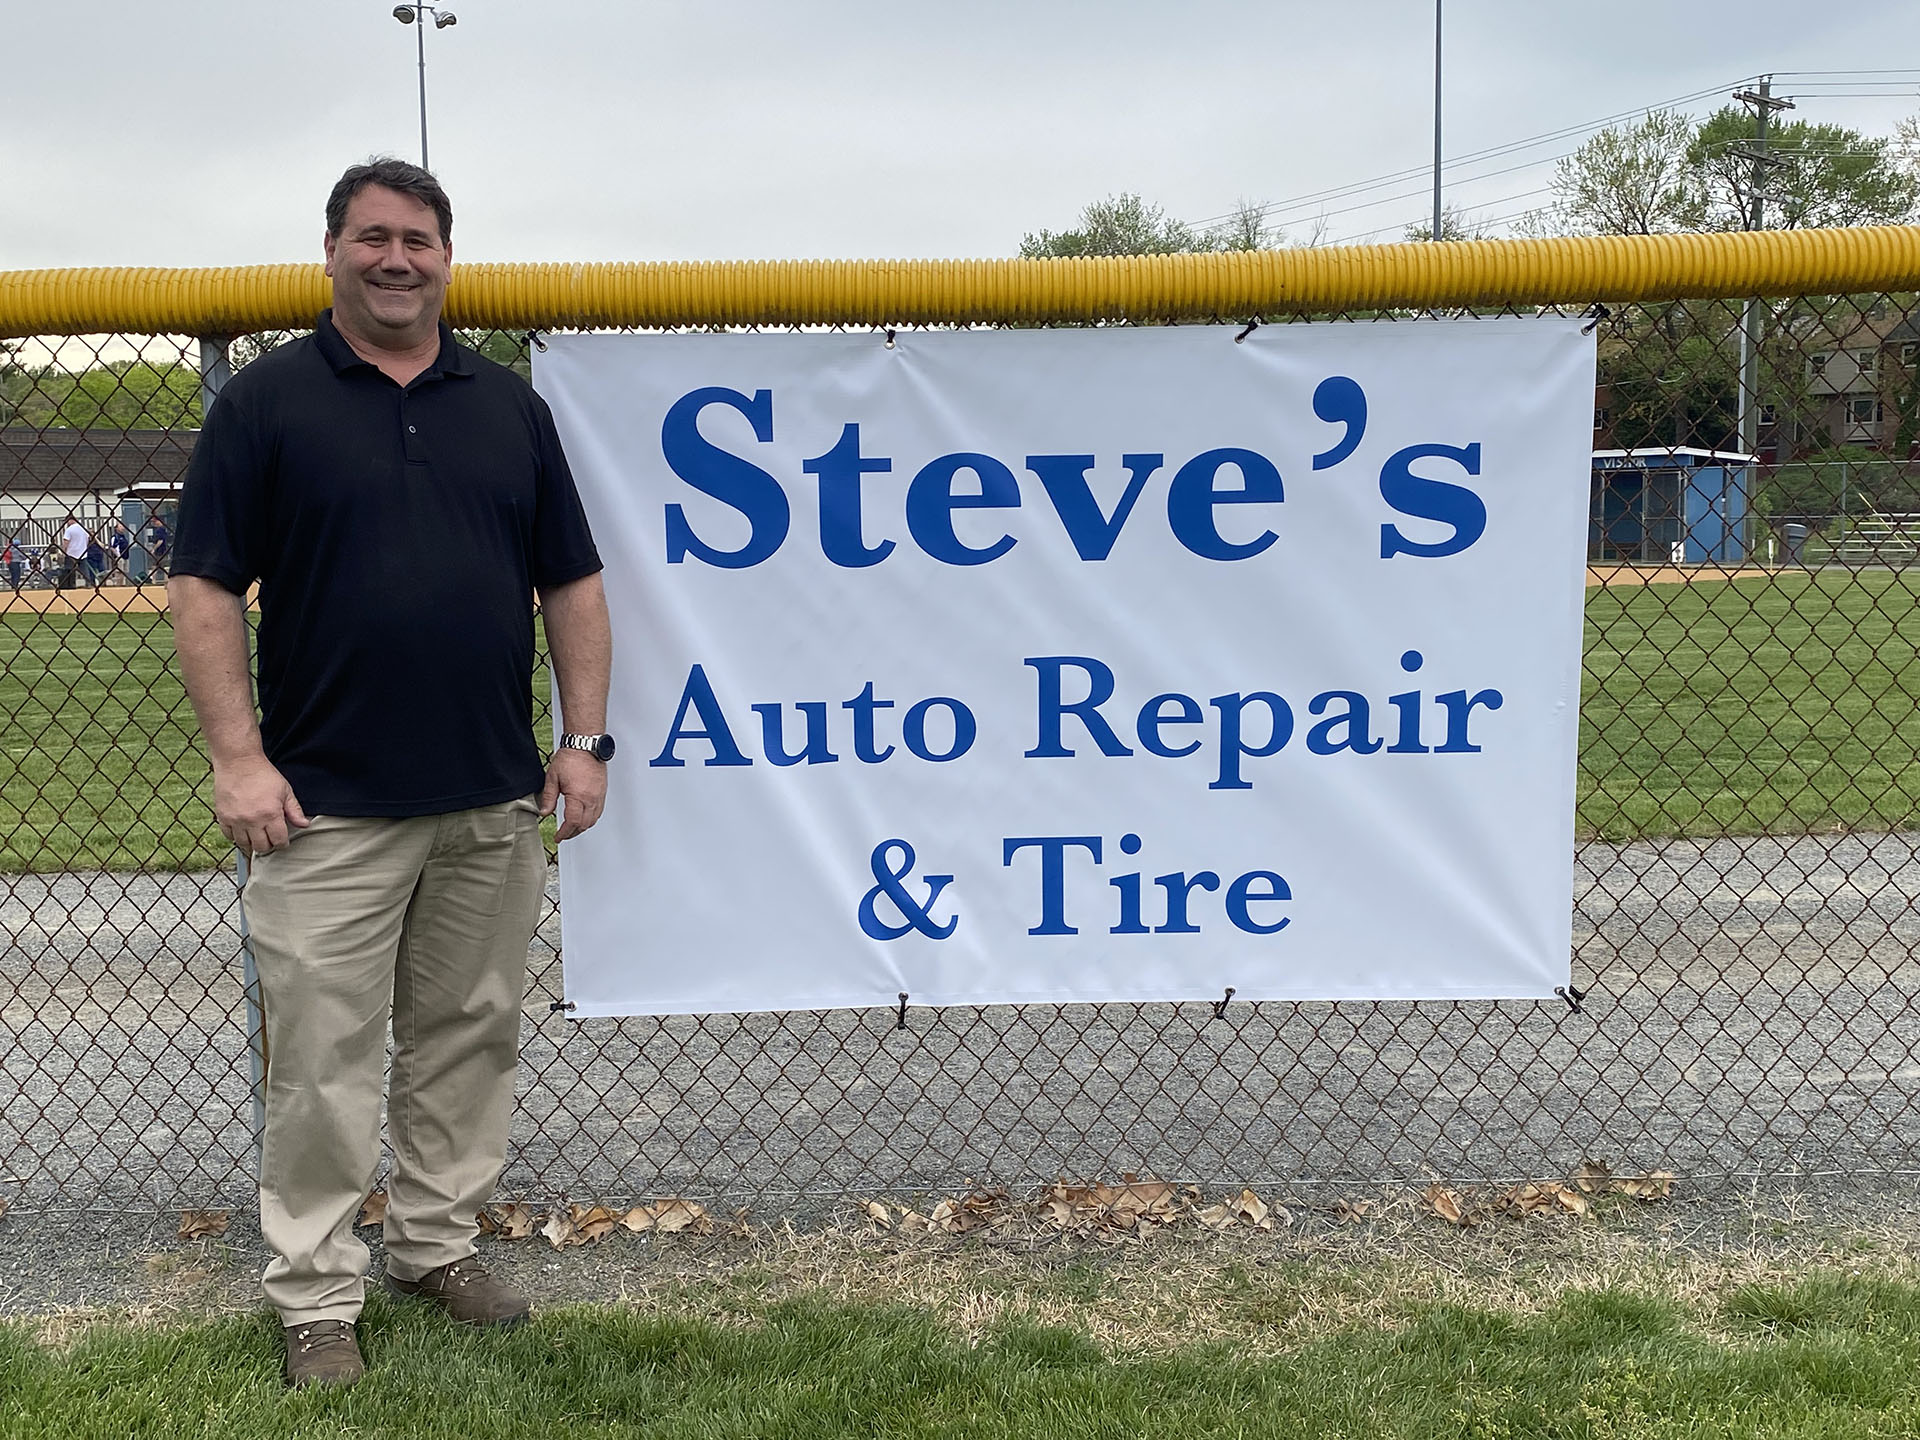 Steve's Auto Repair and Tire owner standing next to Steve's Auto Repair sign at baseball field.